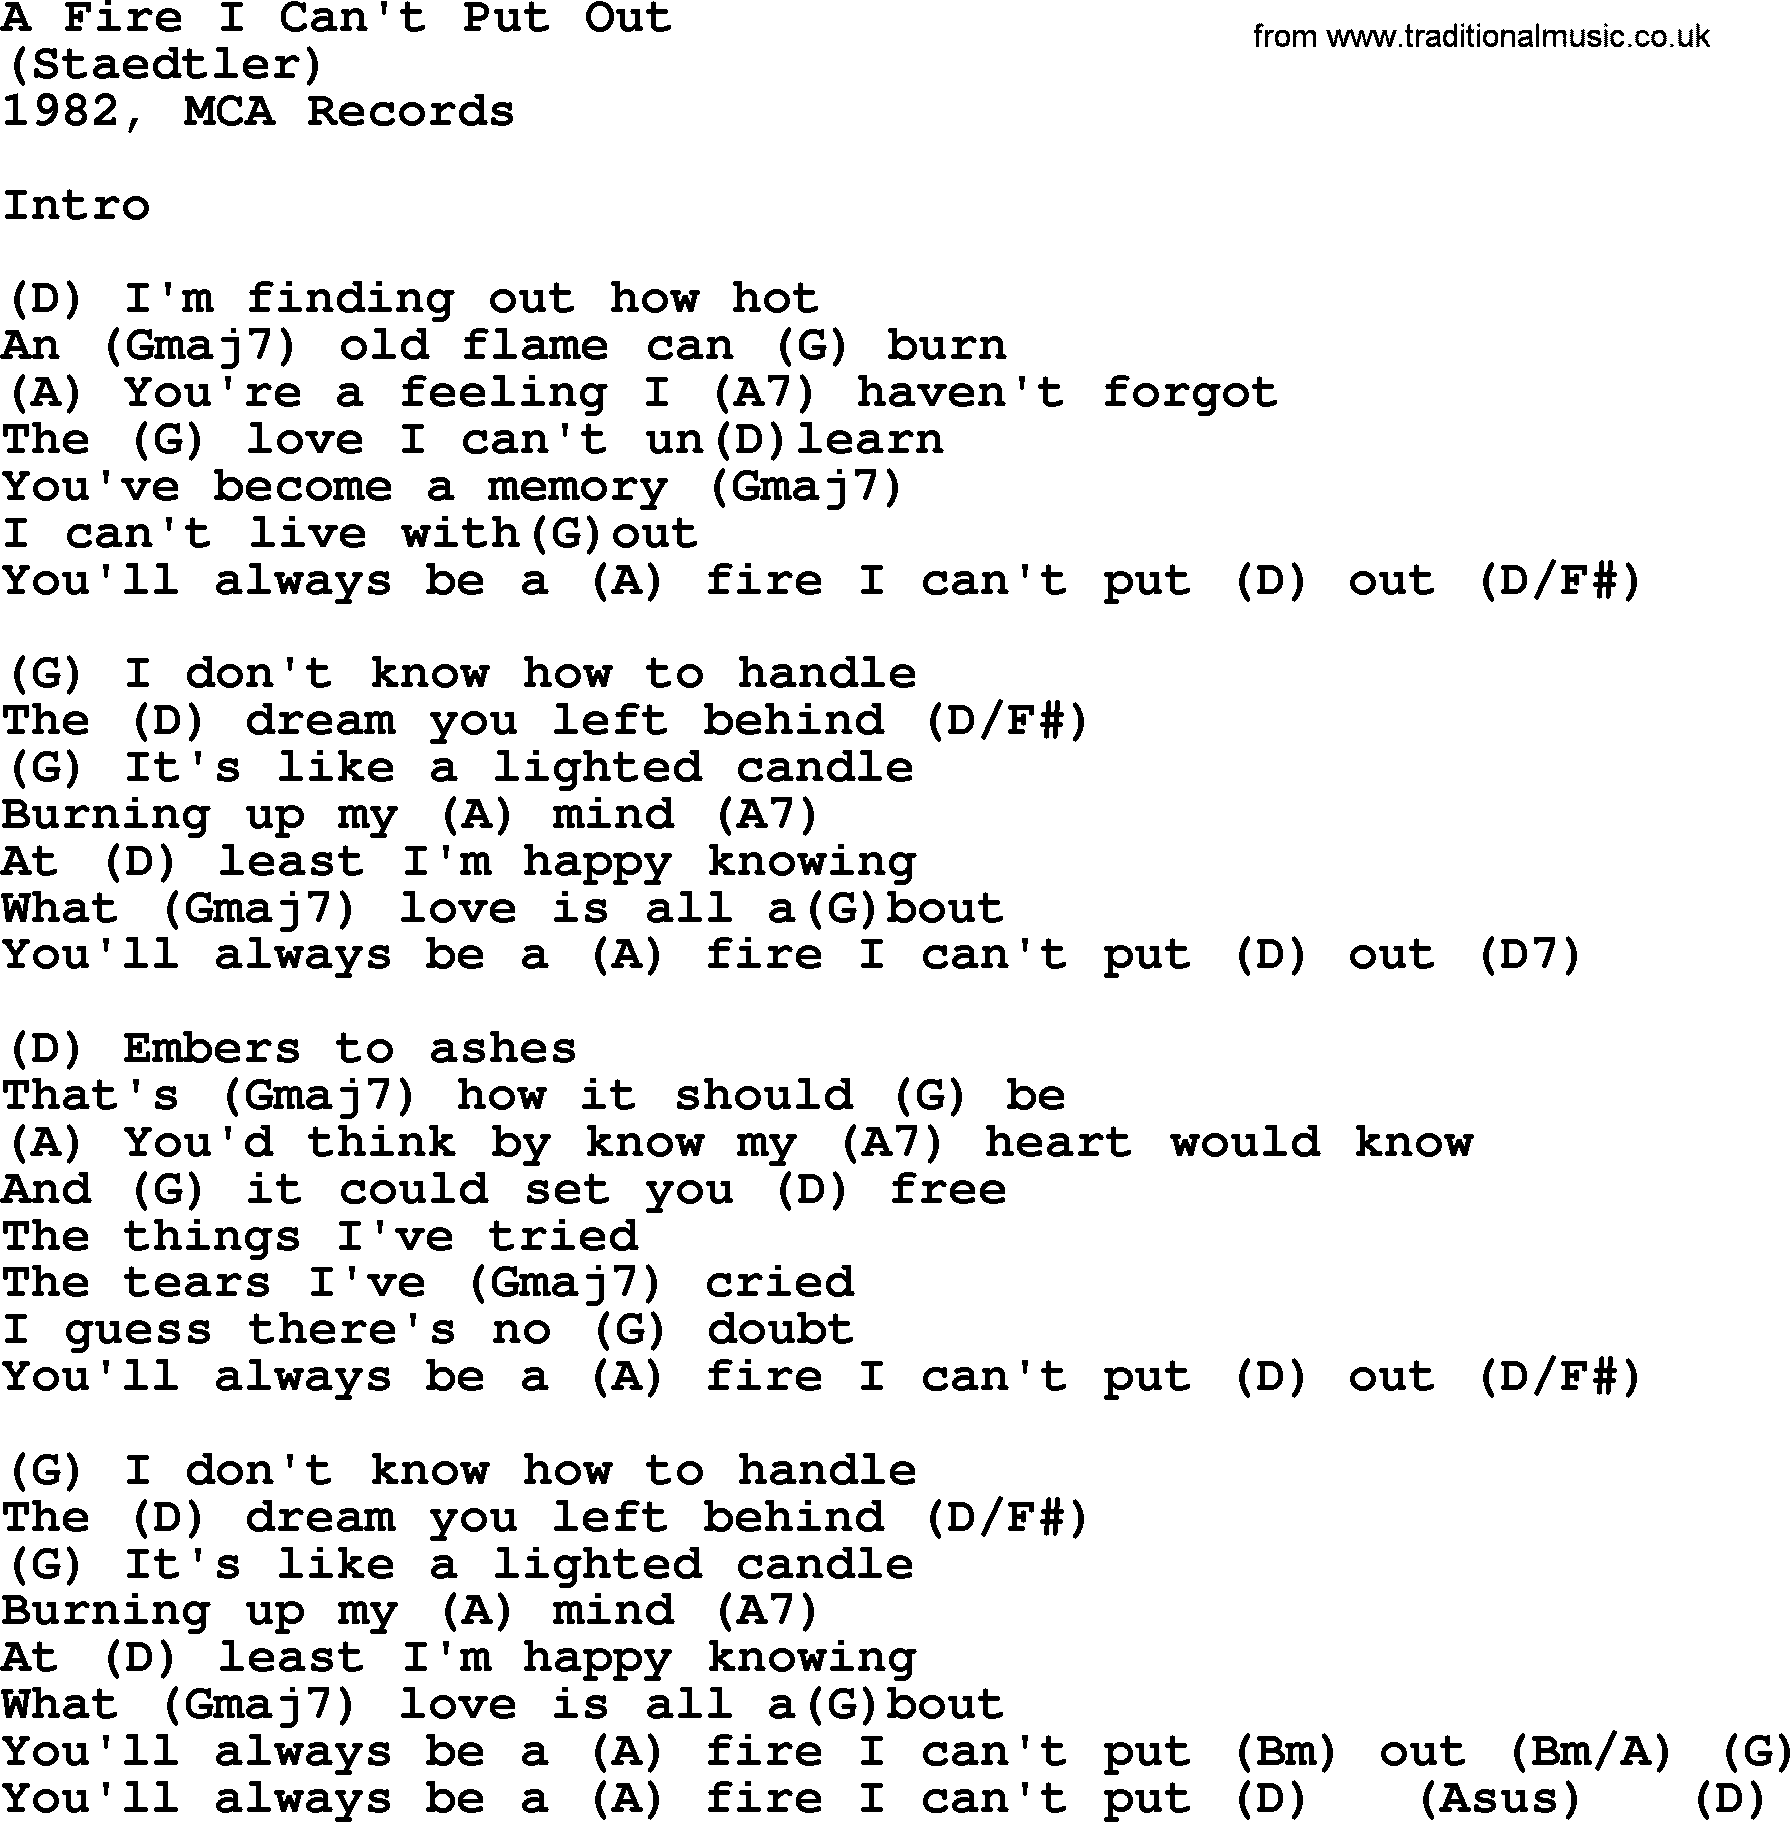 George Strait song: A Fire I Can't Put Out, lyrics and chords